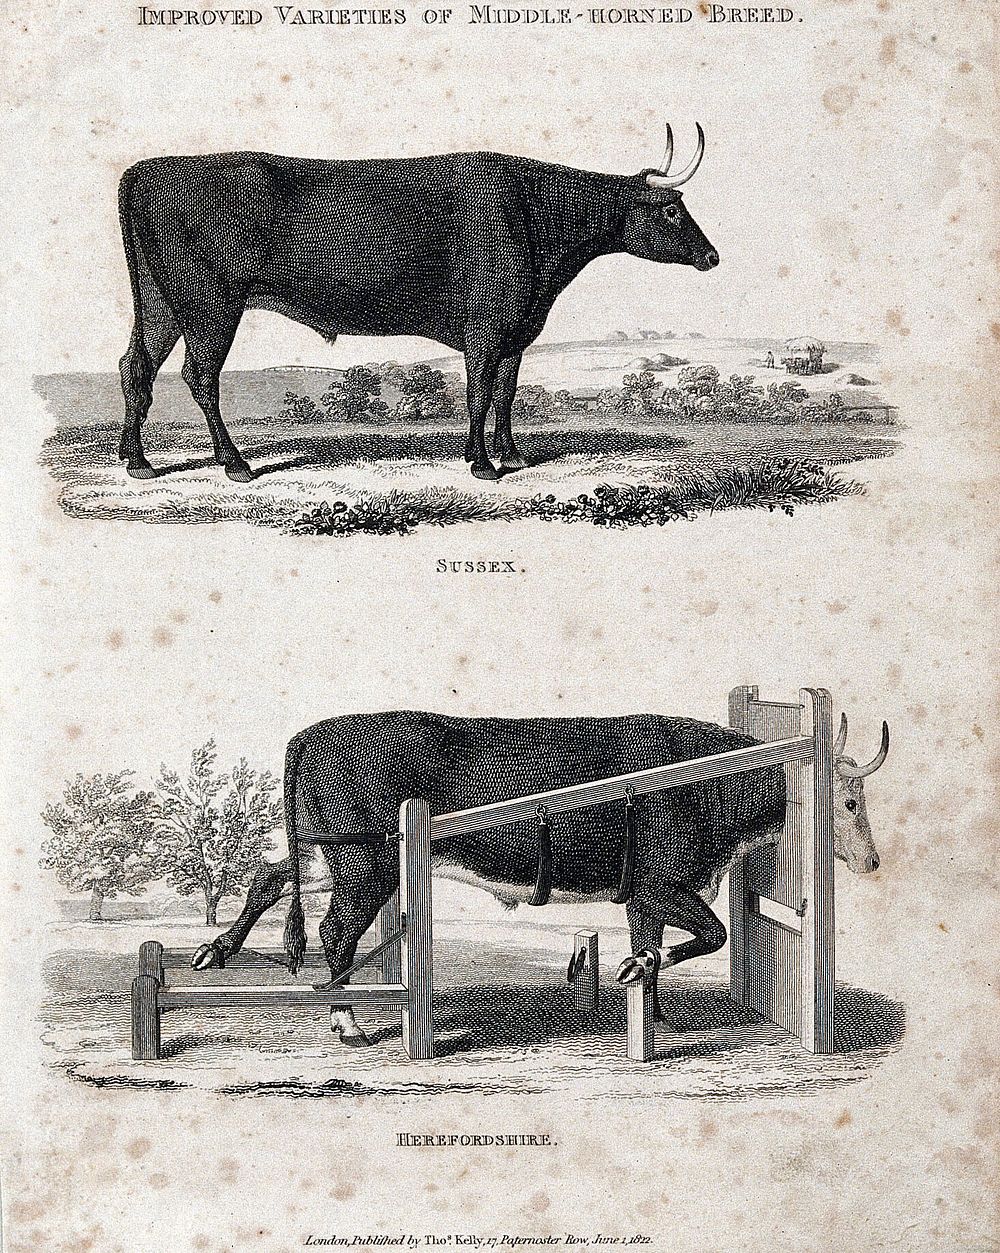 Two middle-horned breeds of cow, the Sussex and Herefordshire. Etching, ca 1822.